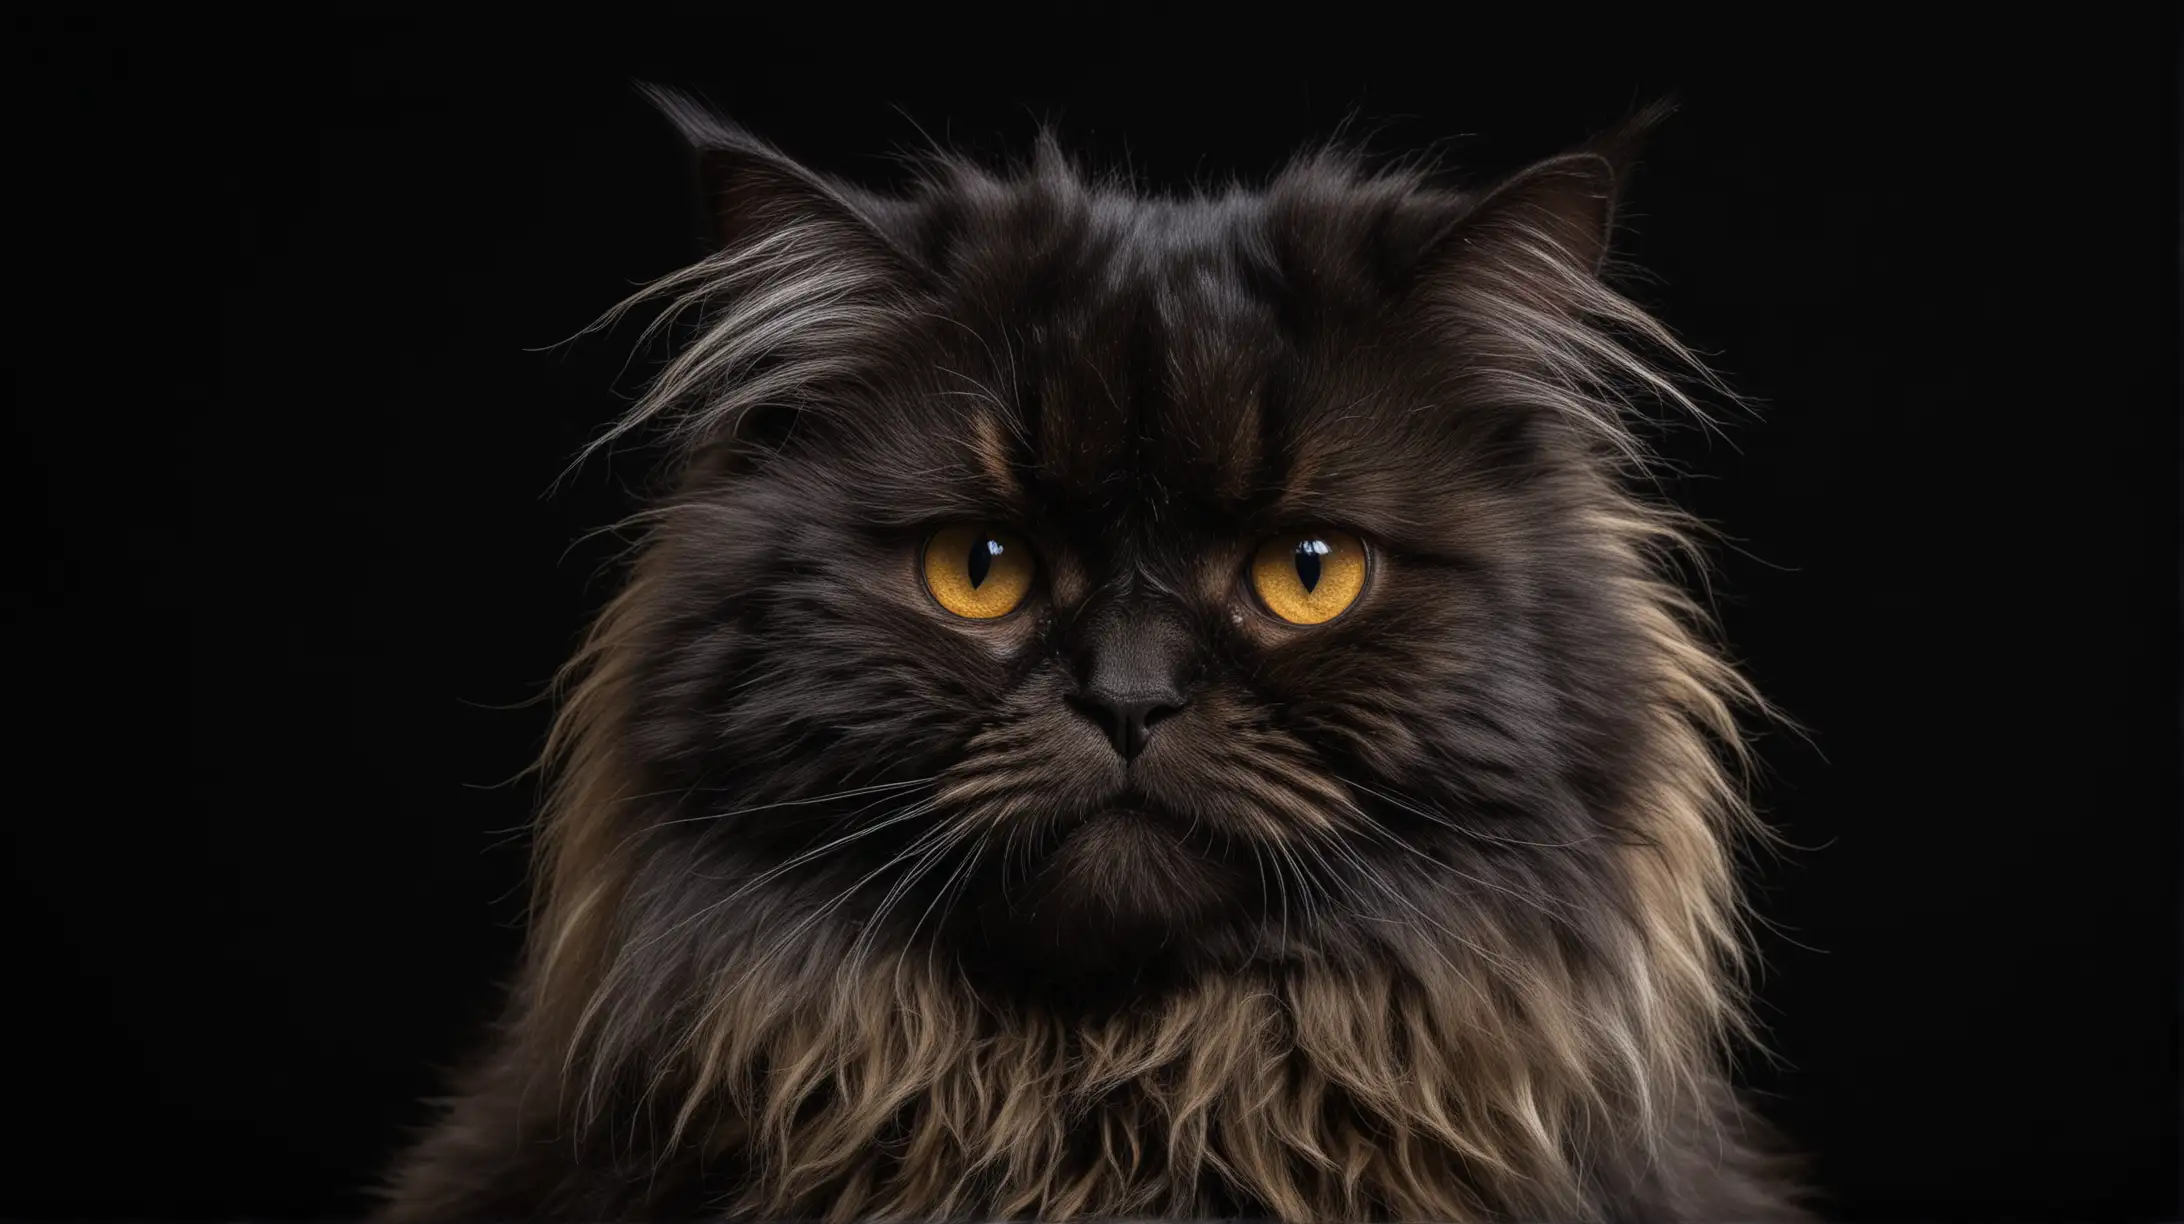 Show me an image of a gorgeous and hairy cat looking at the camera with a black background
